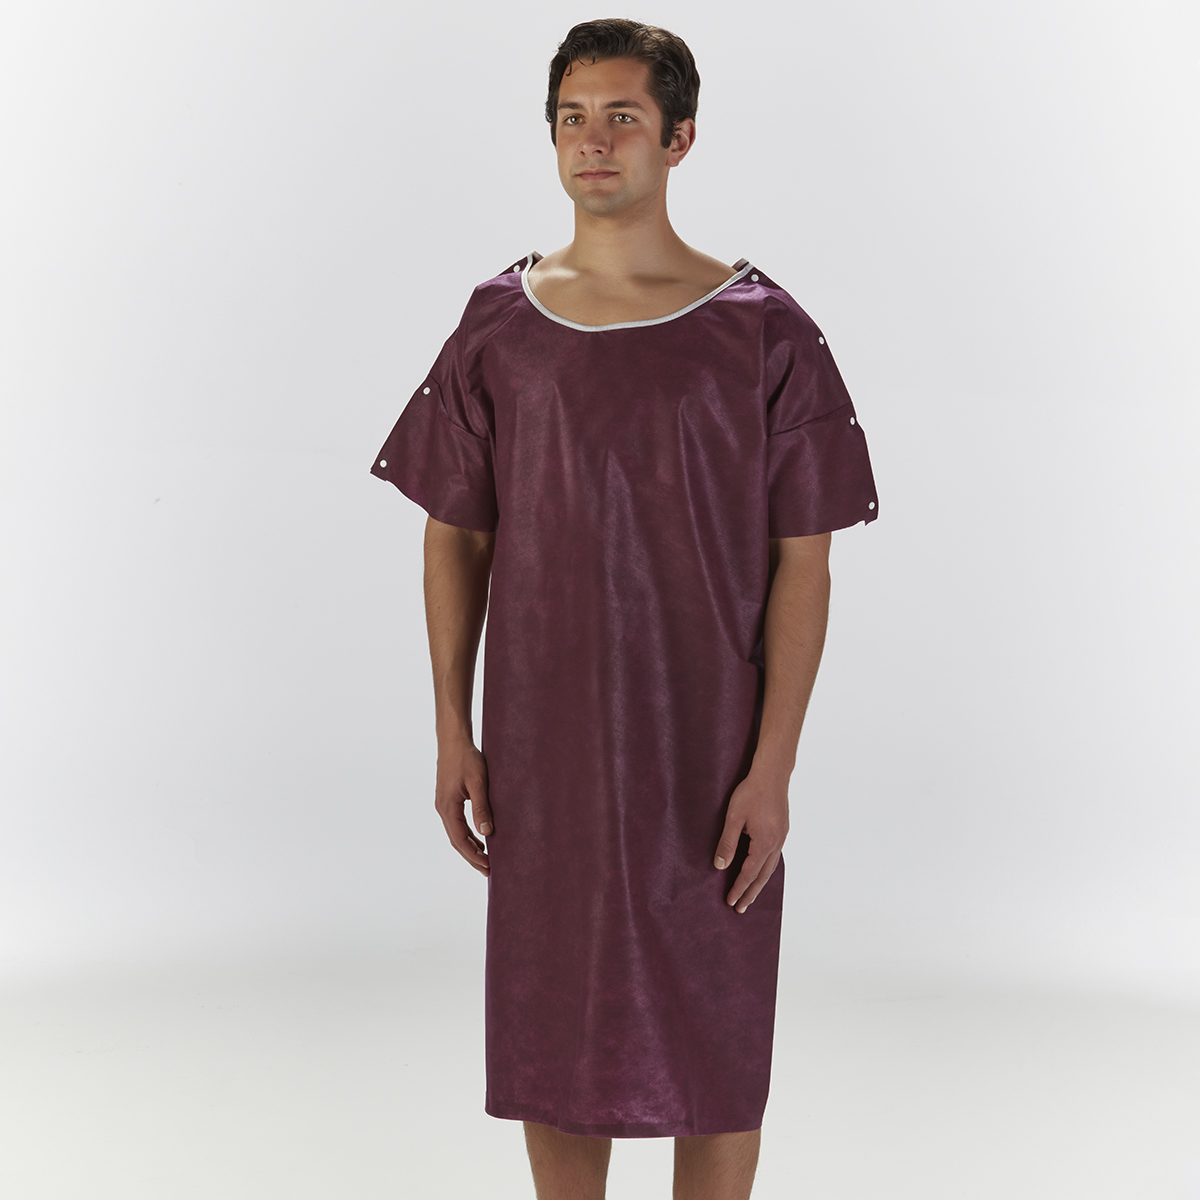 Graham Medical® Snap Sleeve Non-woven SMS Patient Exam Gowns (Maroon)